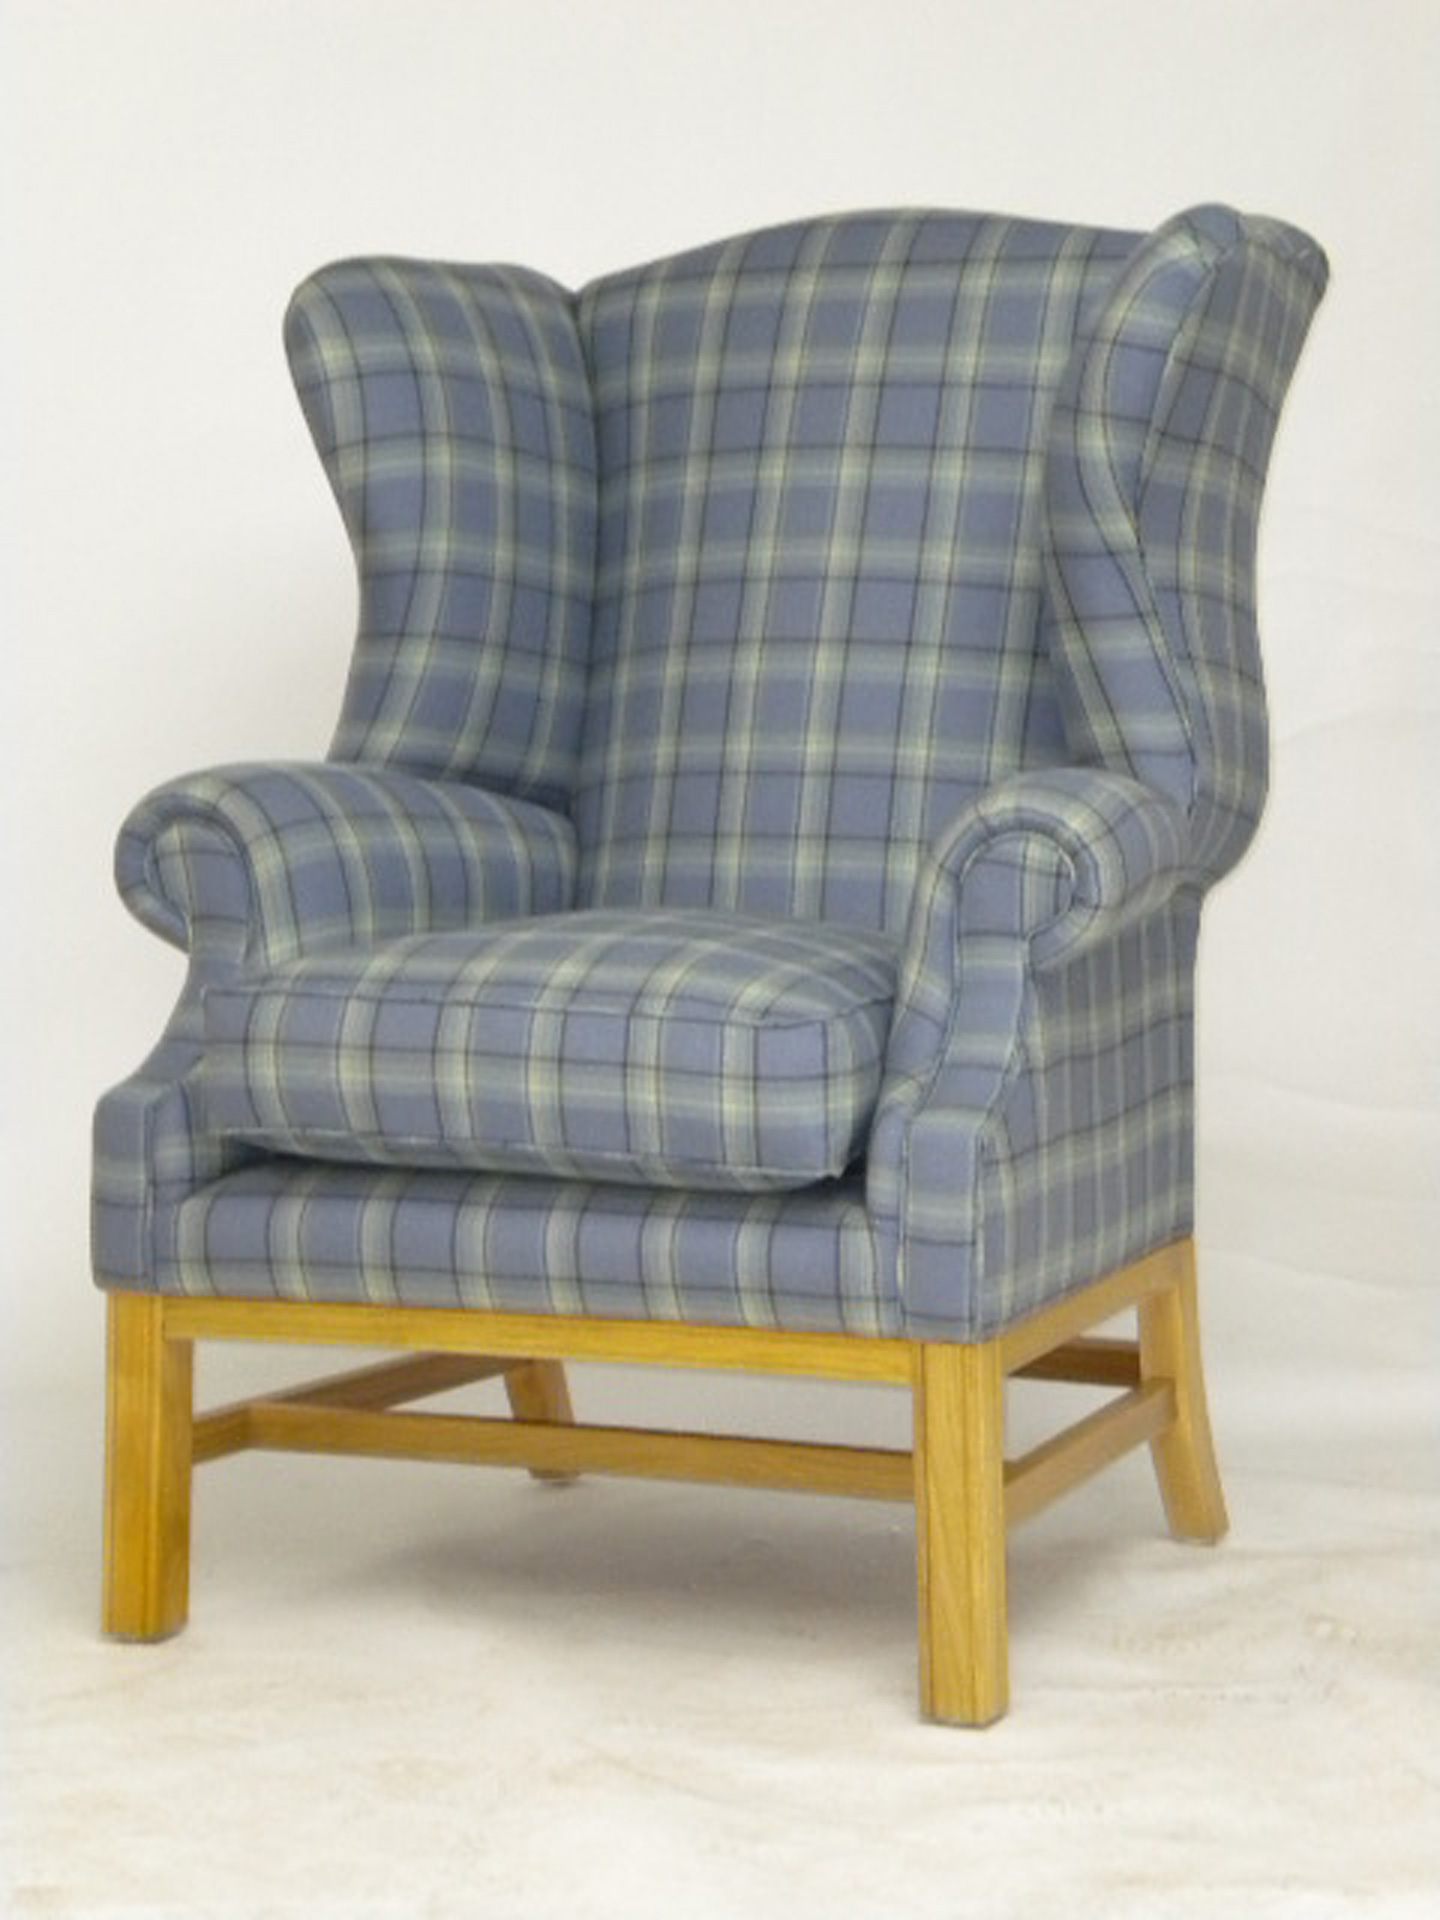 'Kings' Wing Back Chair Ohrensessel aus Stoff